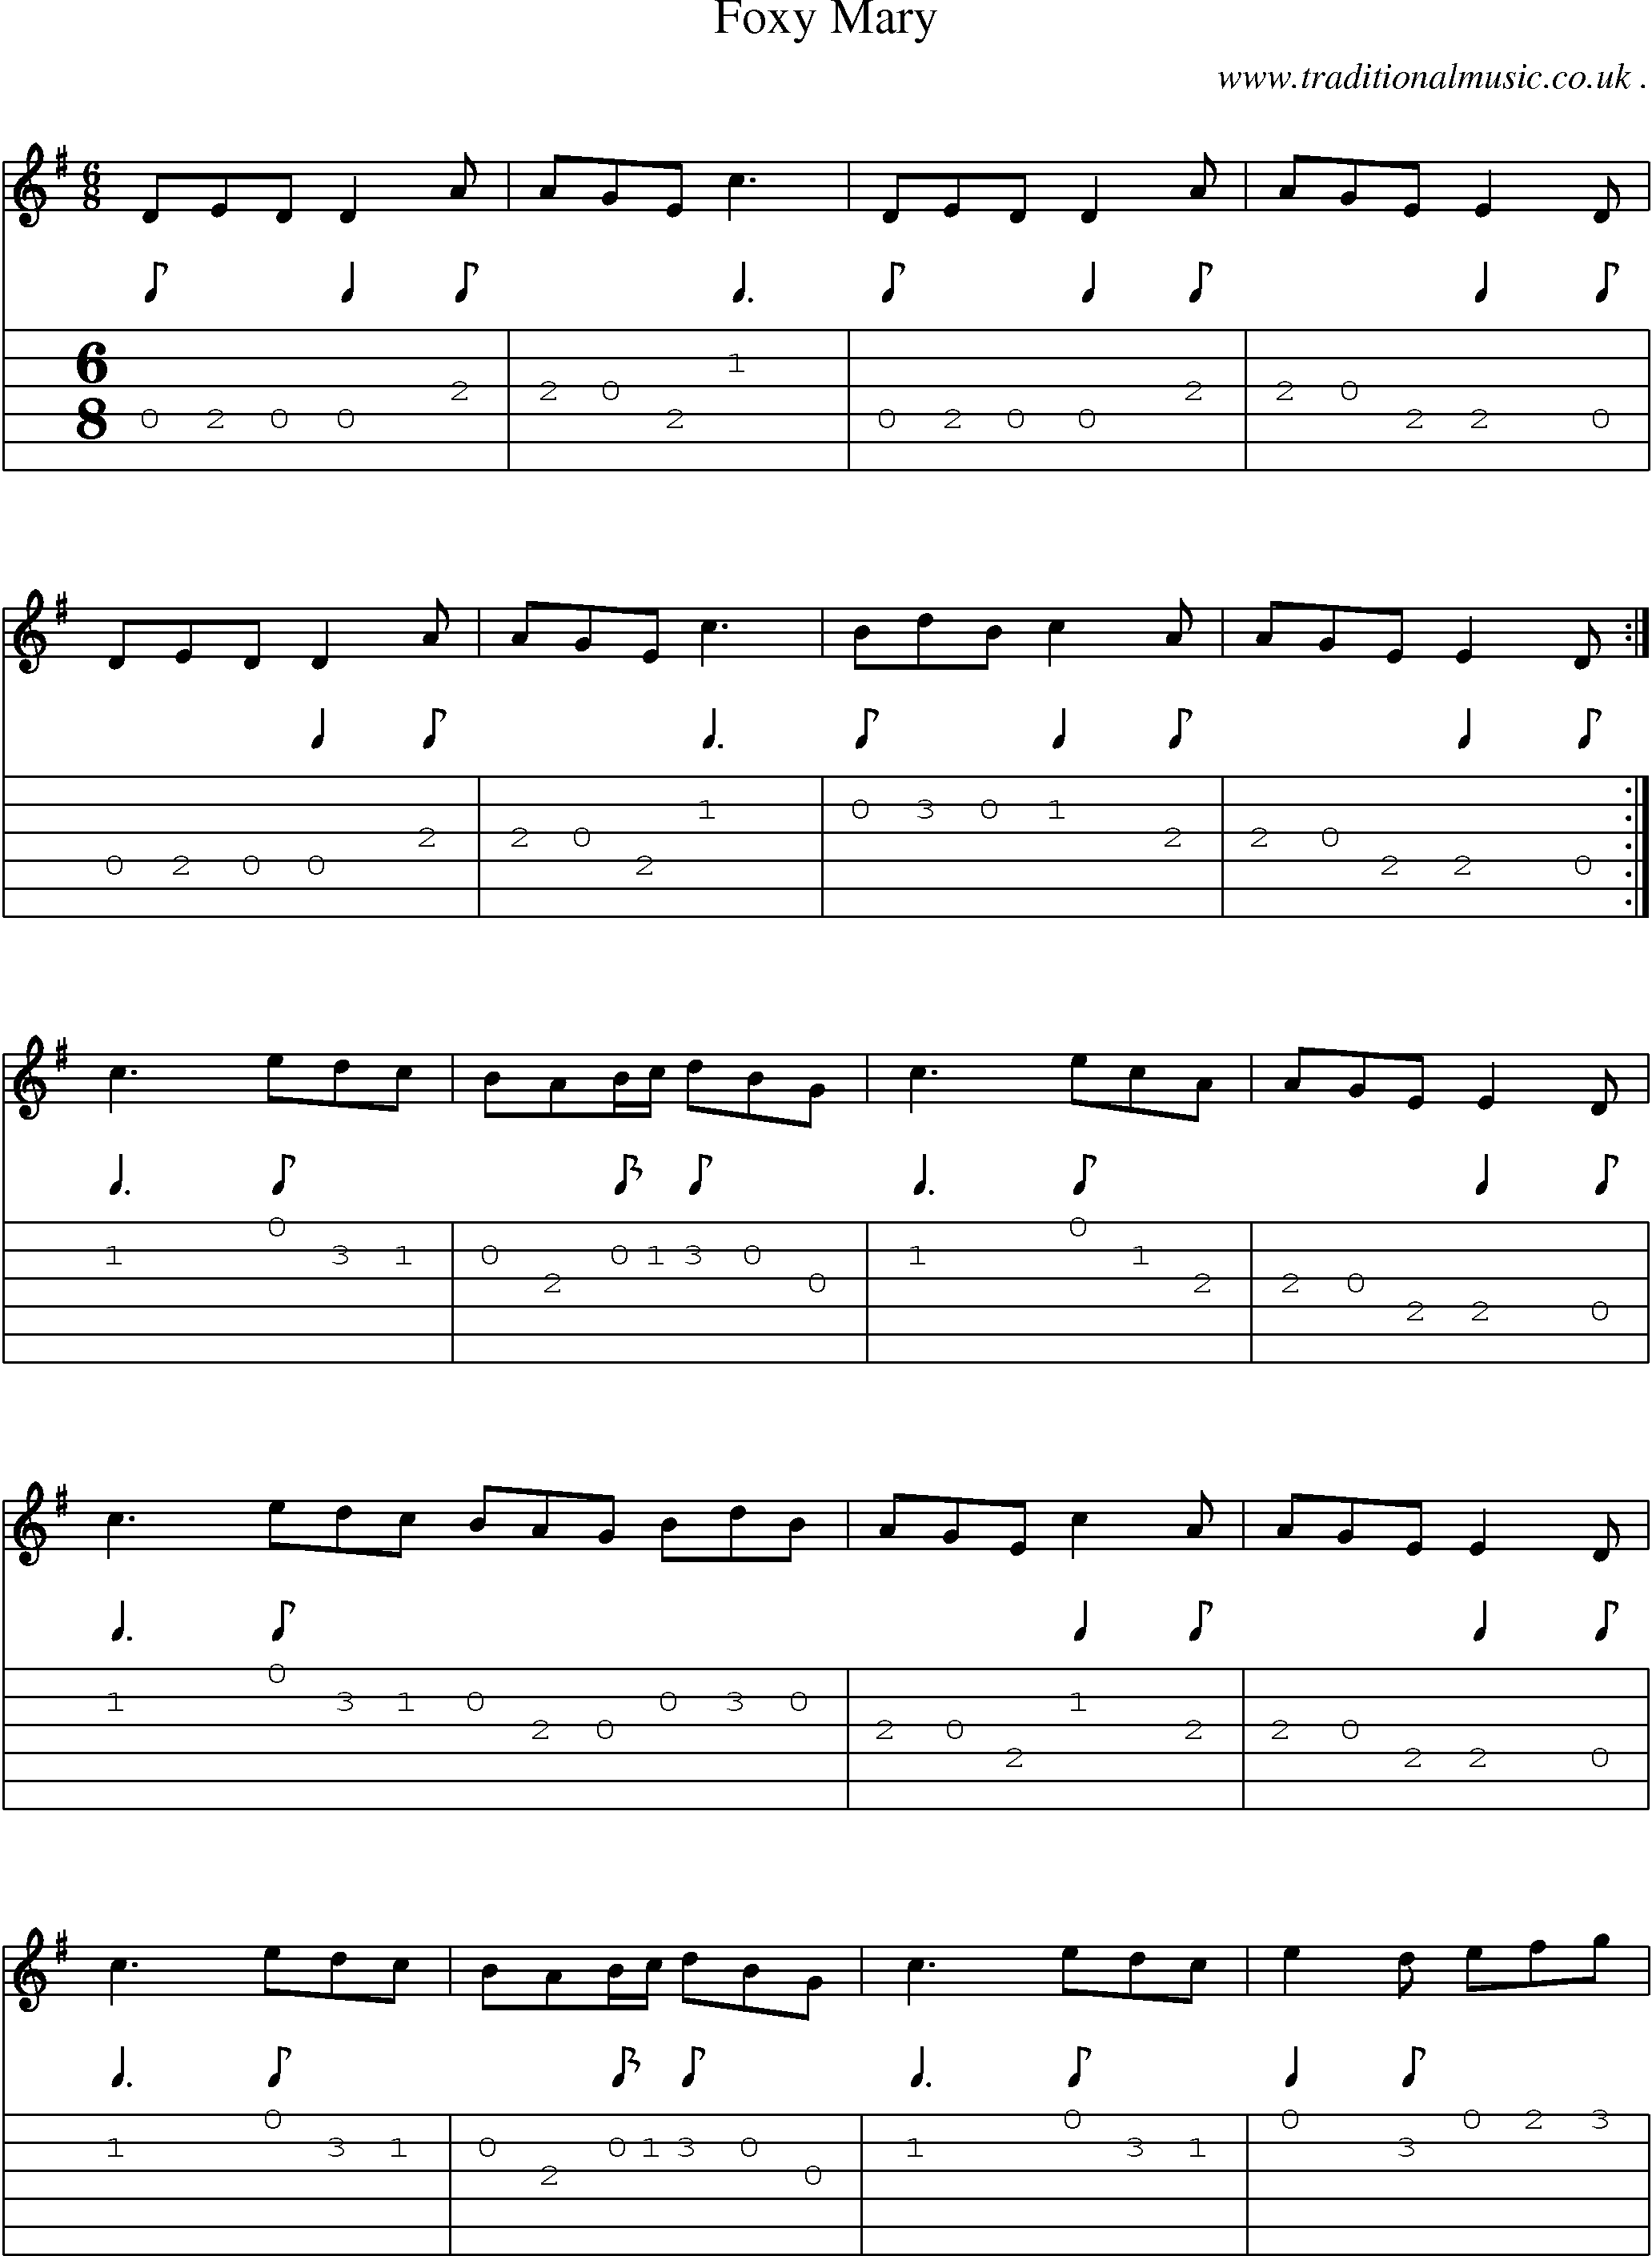 Sheet-Music and Guitar Tabs for Foxy Mary